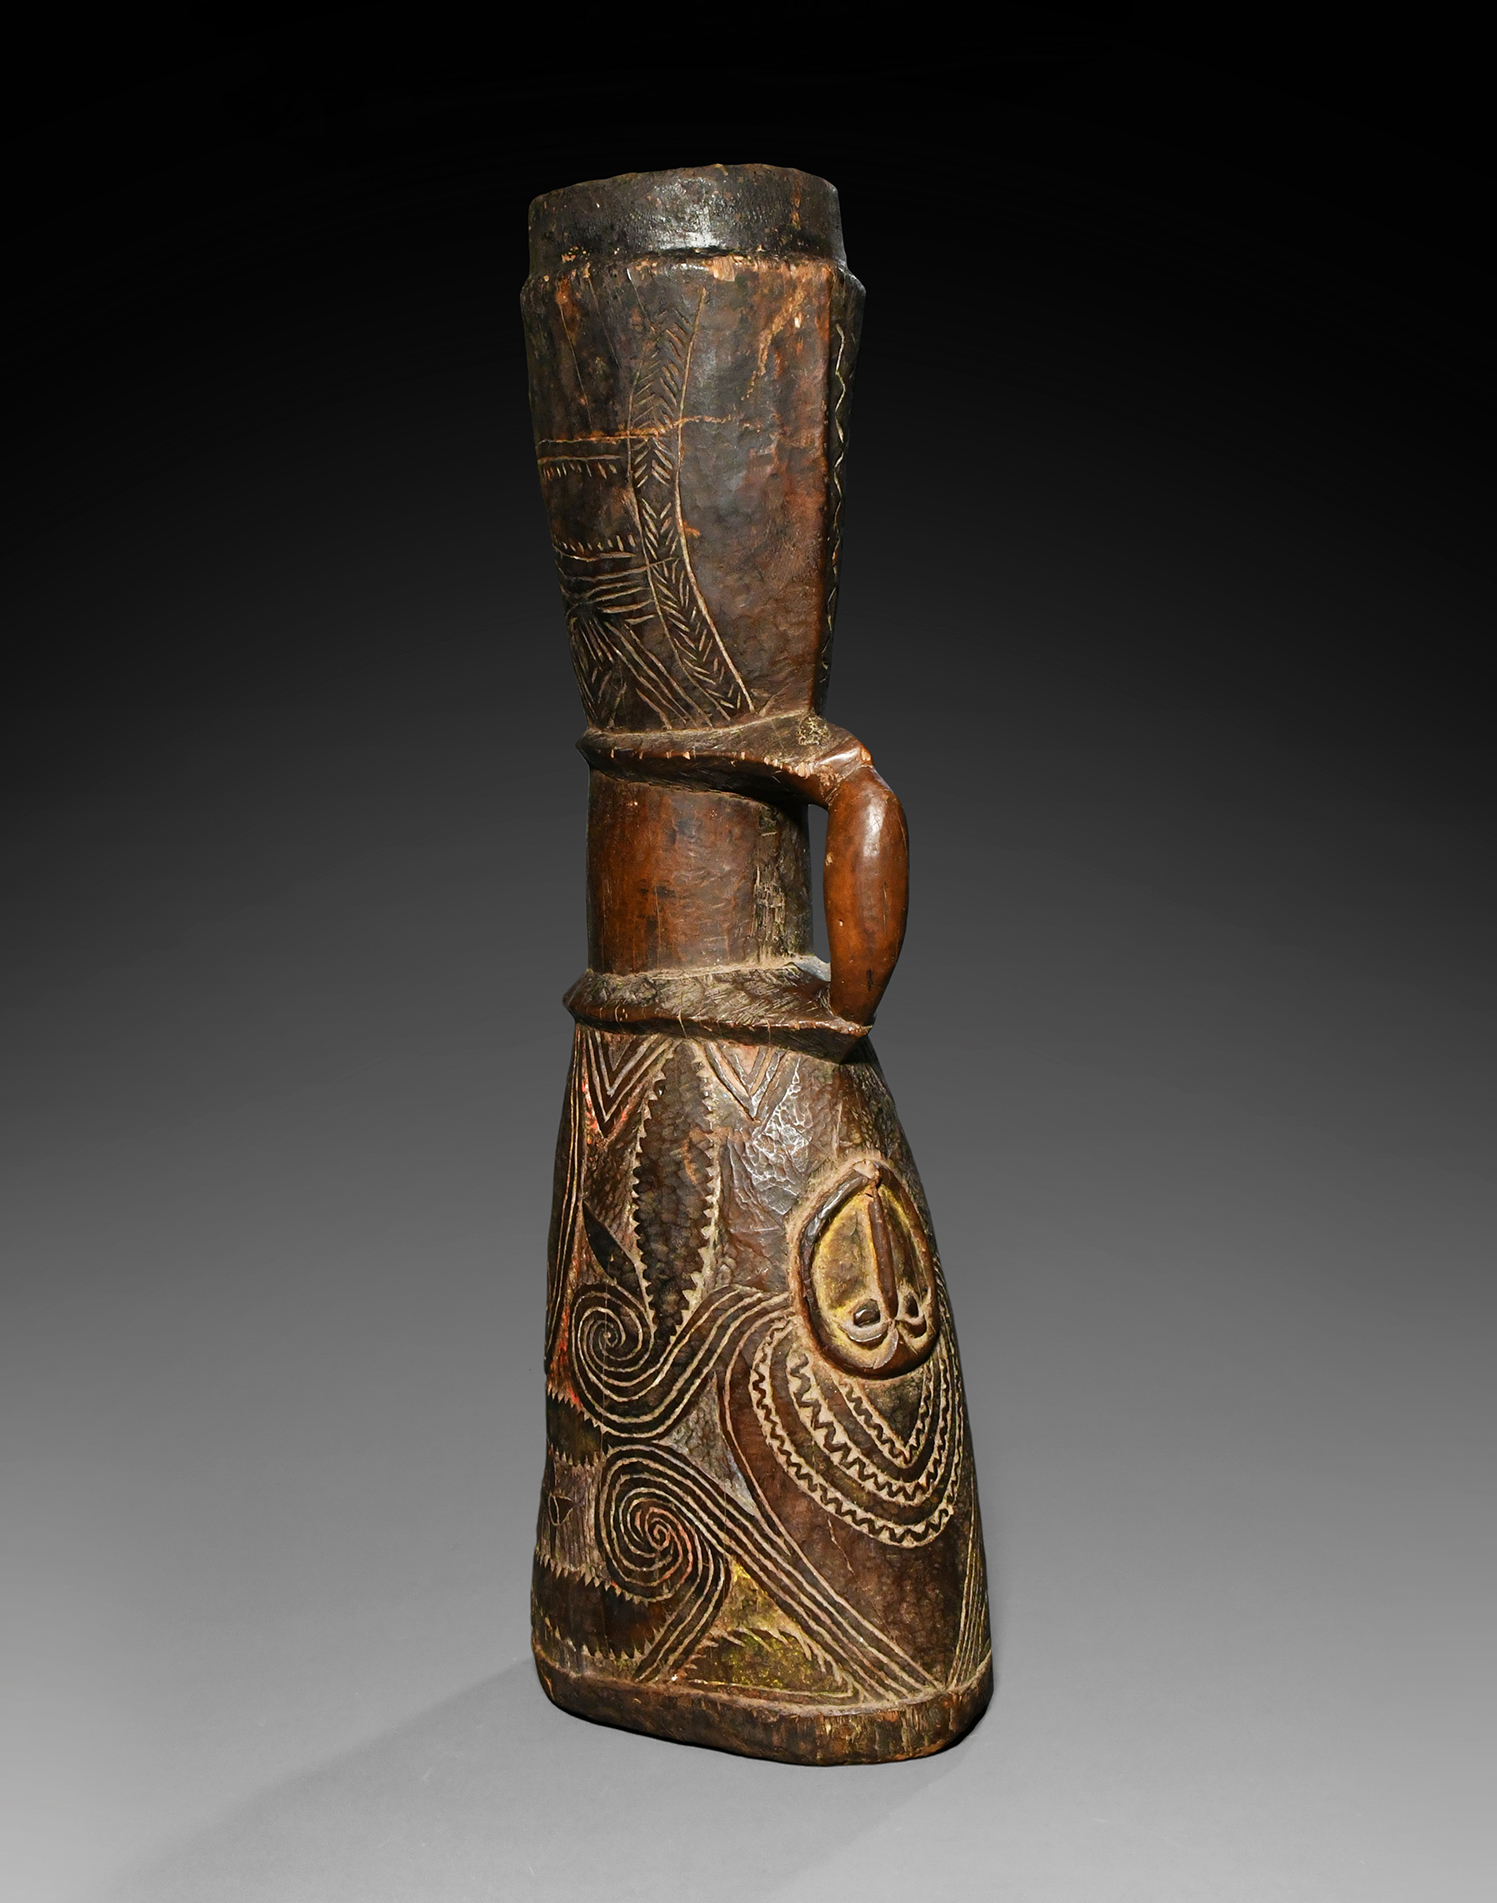 A Superb Old Drum Abelam People East Sepik Province Papua New Guinea 19th C